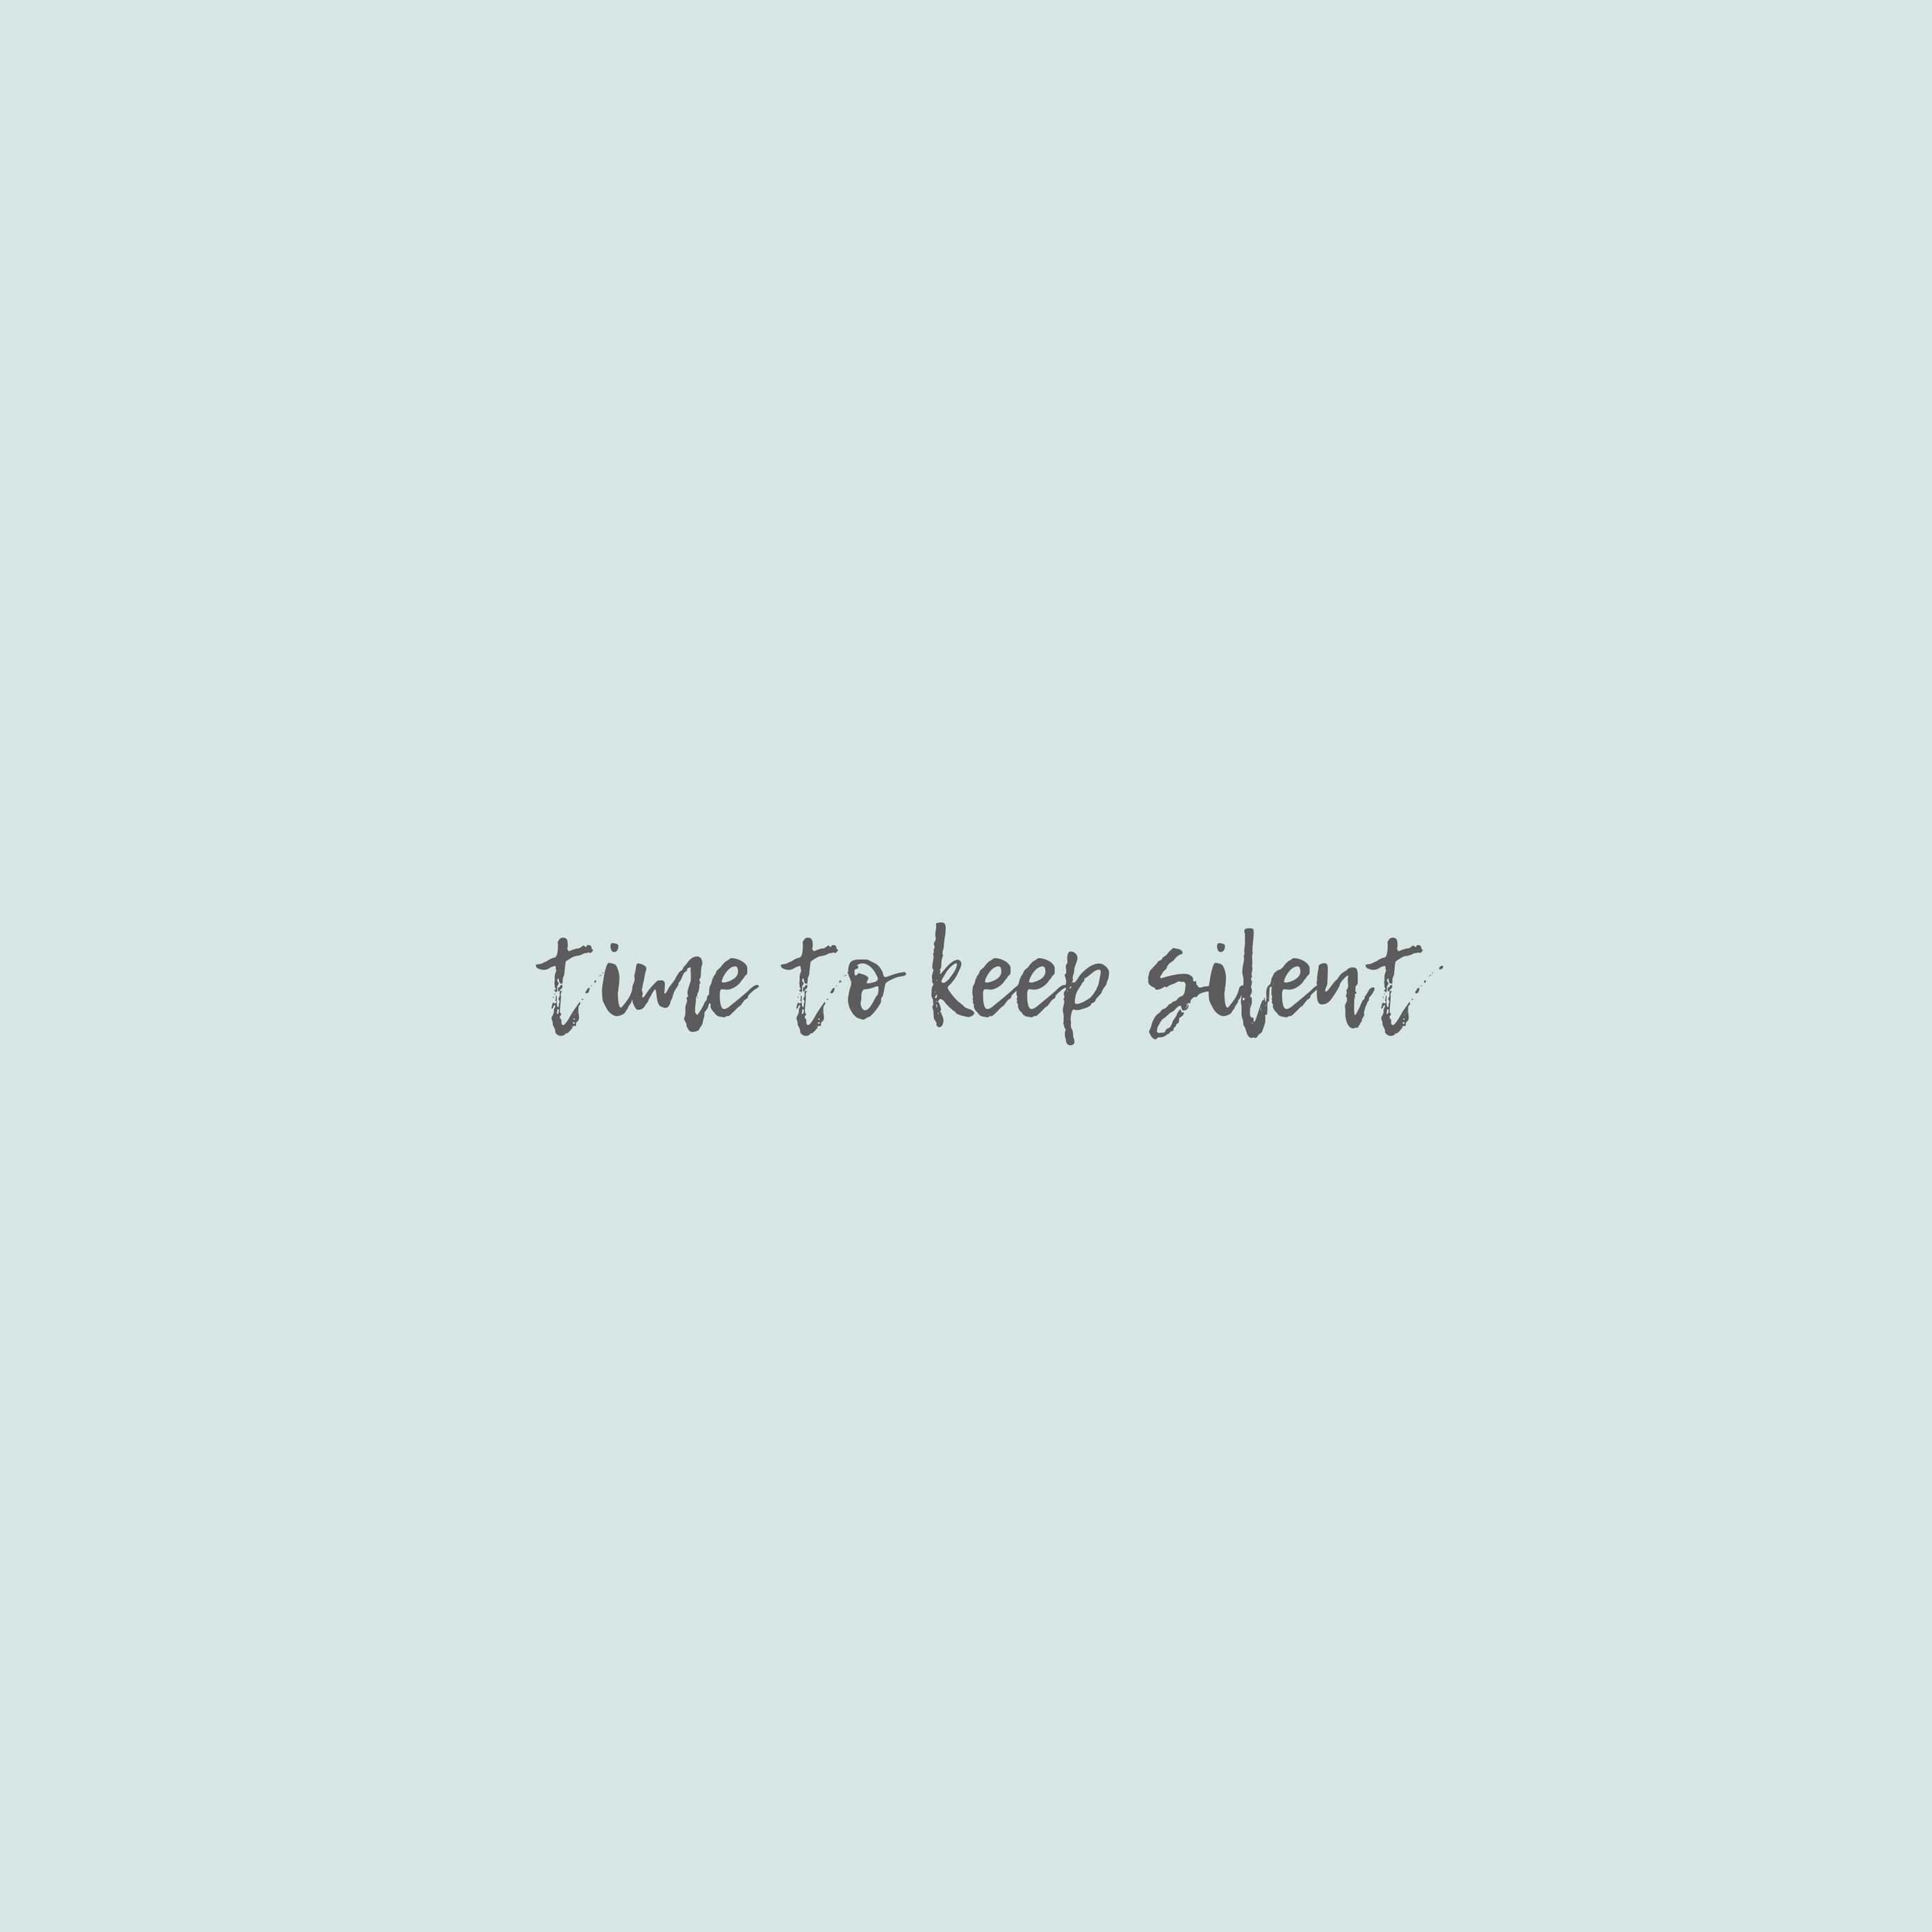 Download wallpaper 2780x2780 silence, words, phrase, text, inscription ipad air, ipad air ipad ipad ipad mini ipad mini ipad mini ipad pro 9.7 for parallax HD background